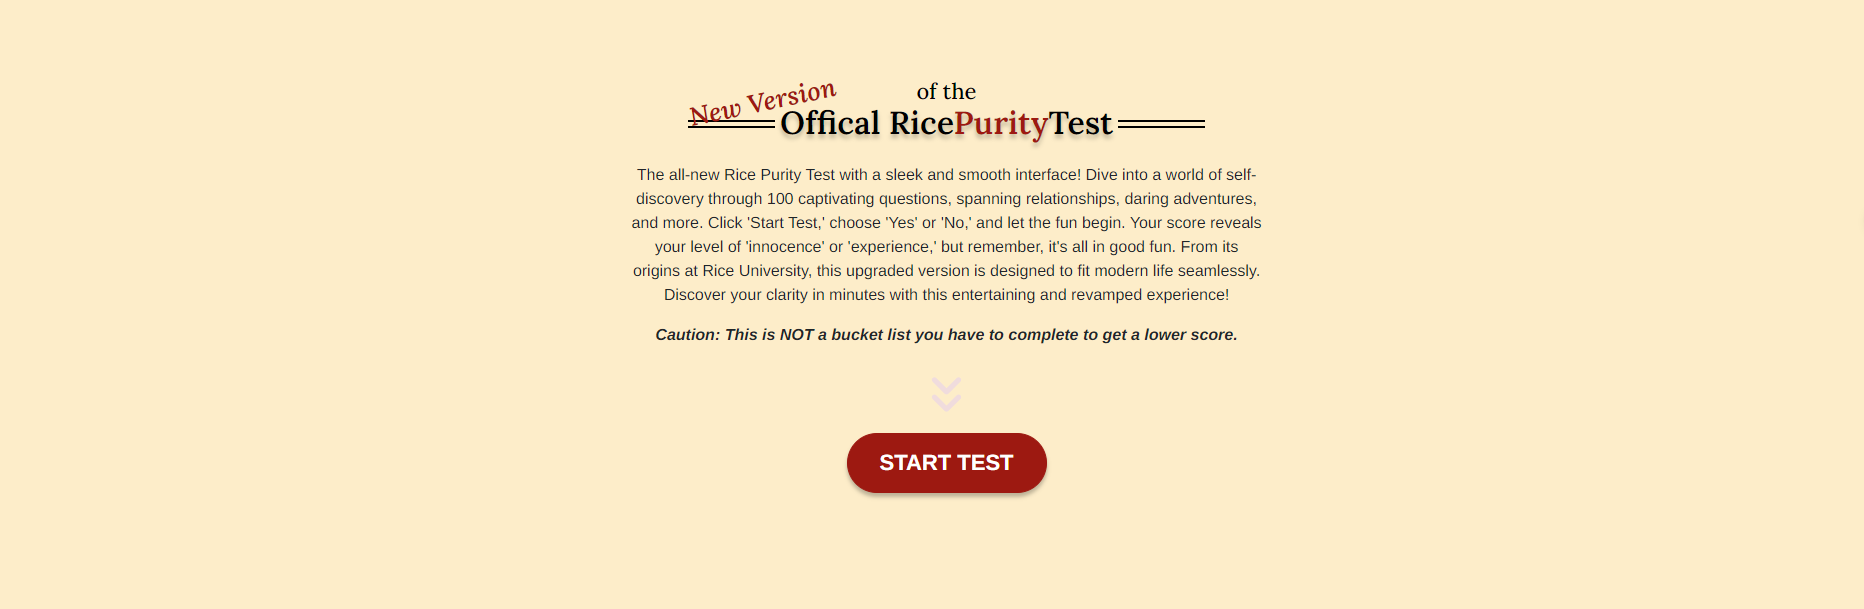 rice purity test